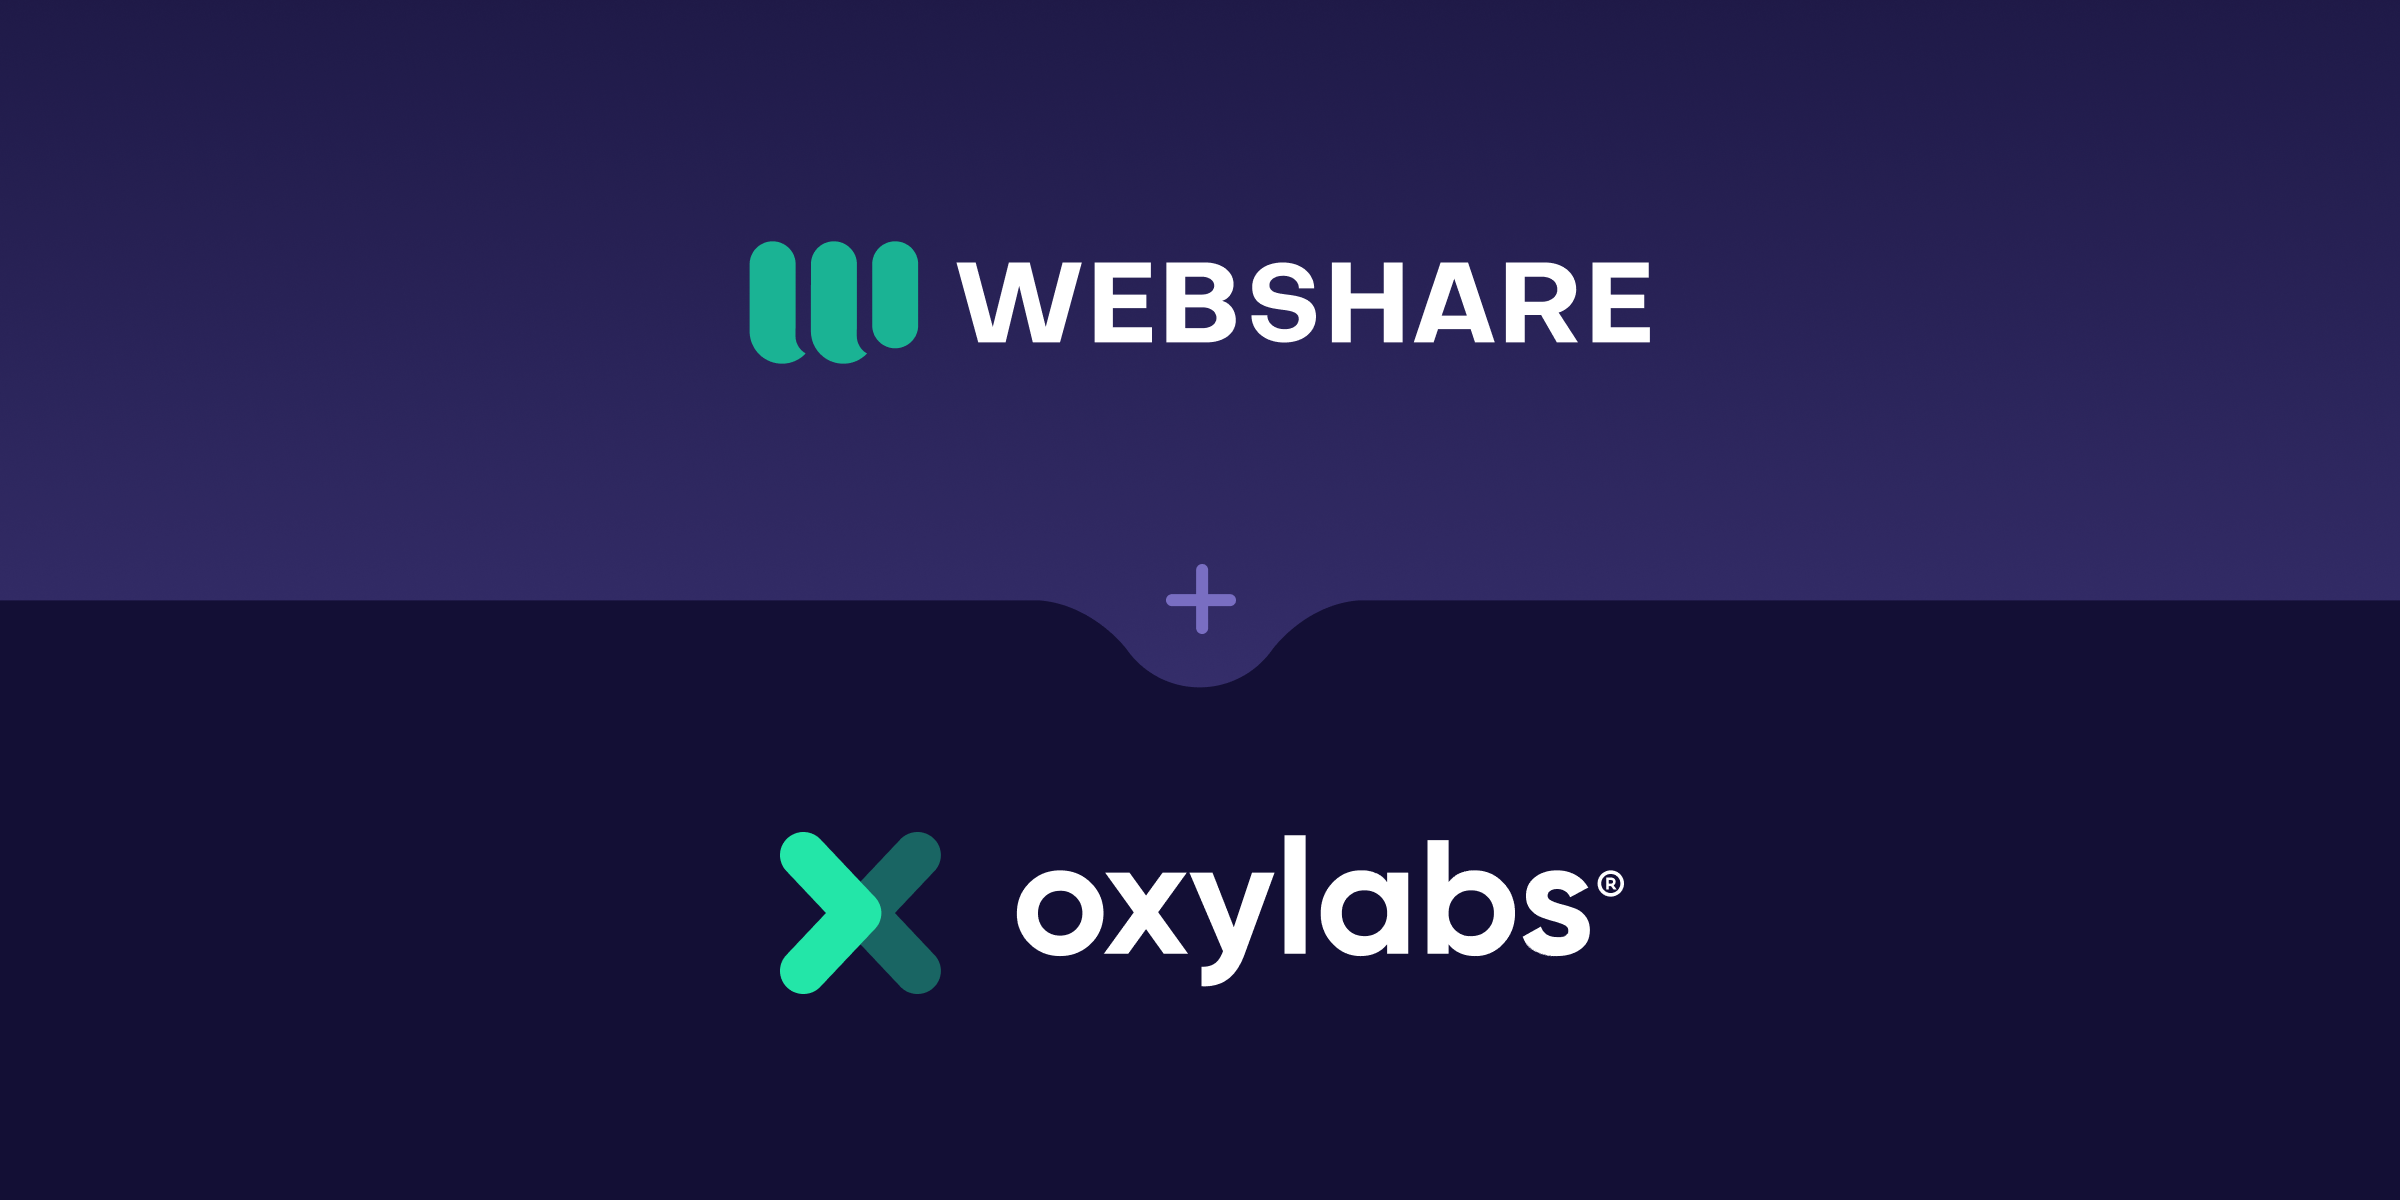 Oxylabs, Tuesday, September 20, 2022, Press release picture